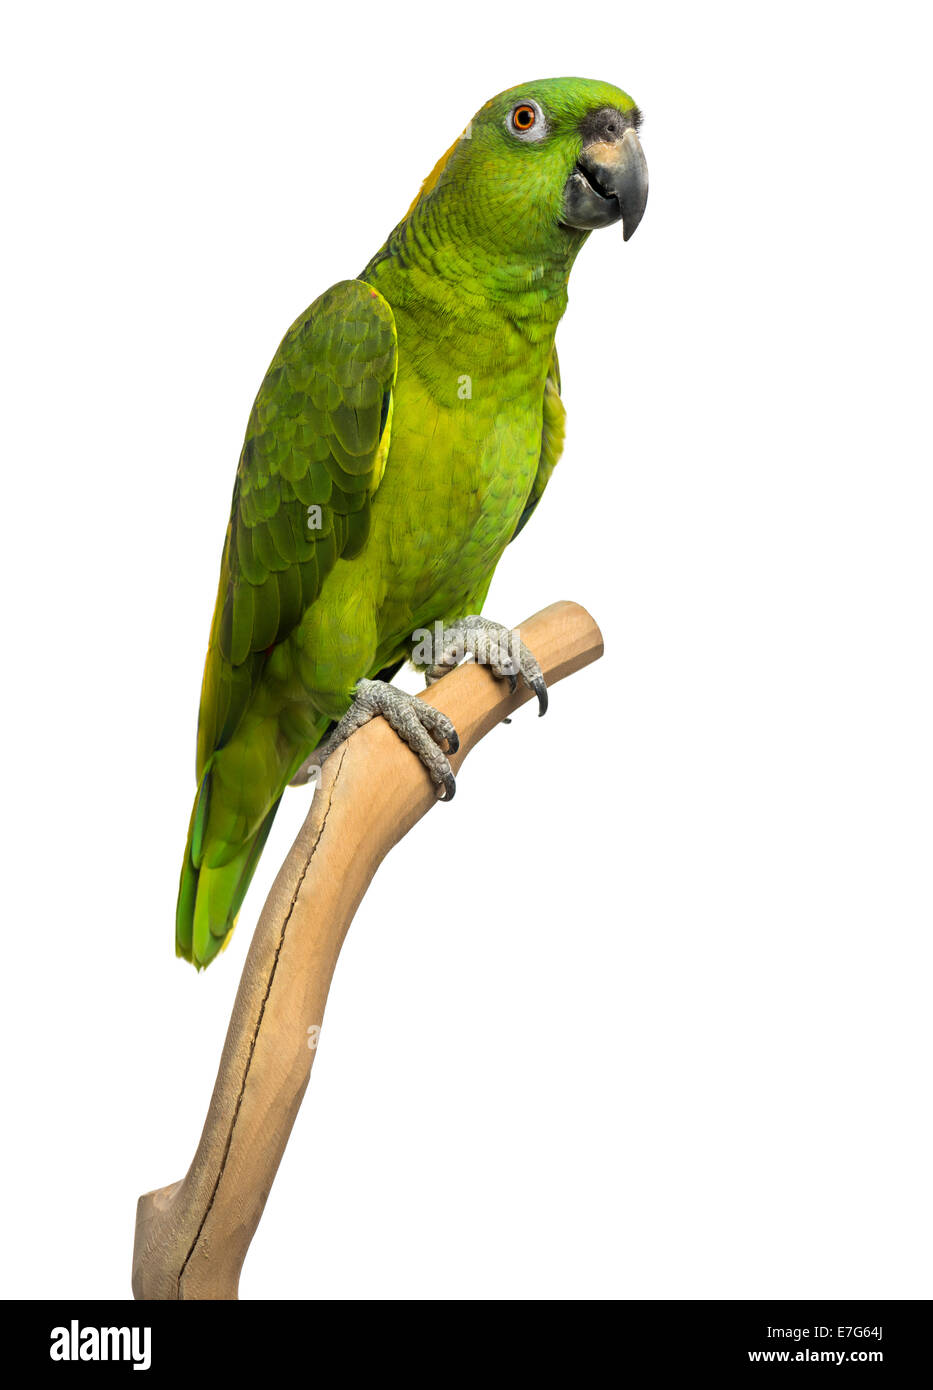 Yellow-naped parrot (6 years old) perched on a branch, isolated on white Stock Photo